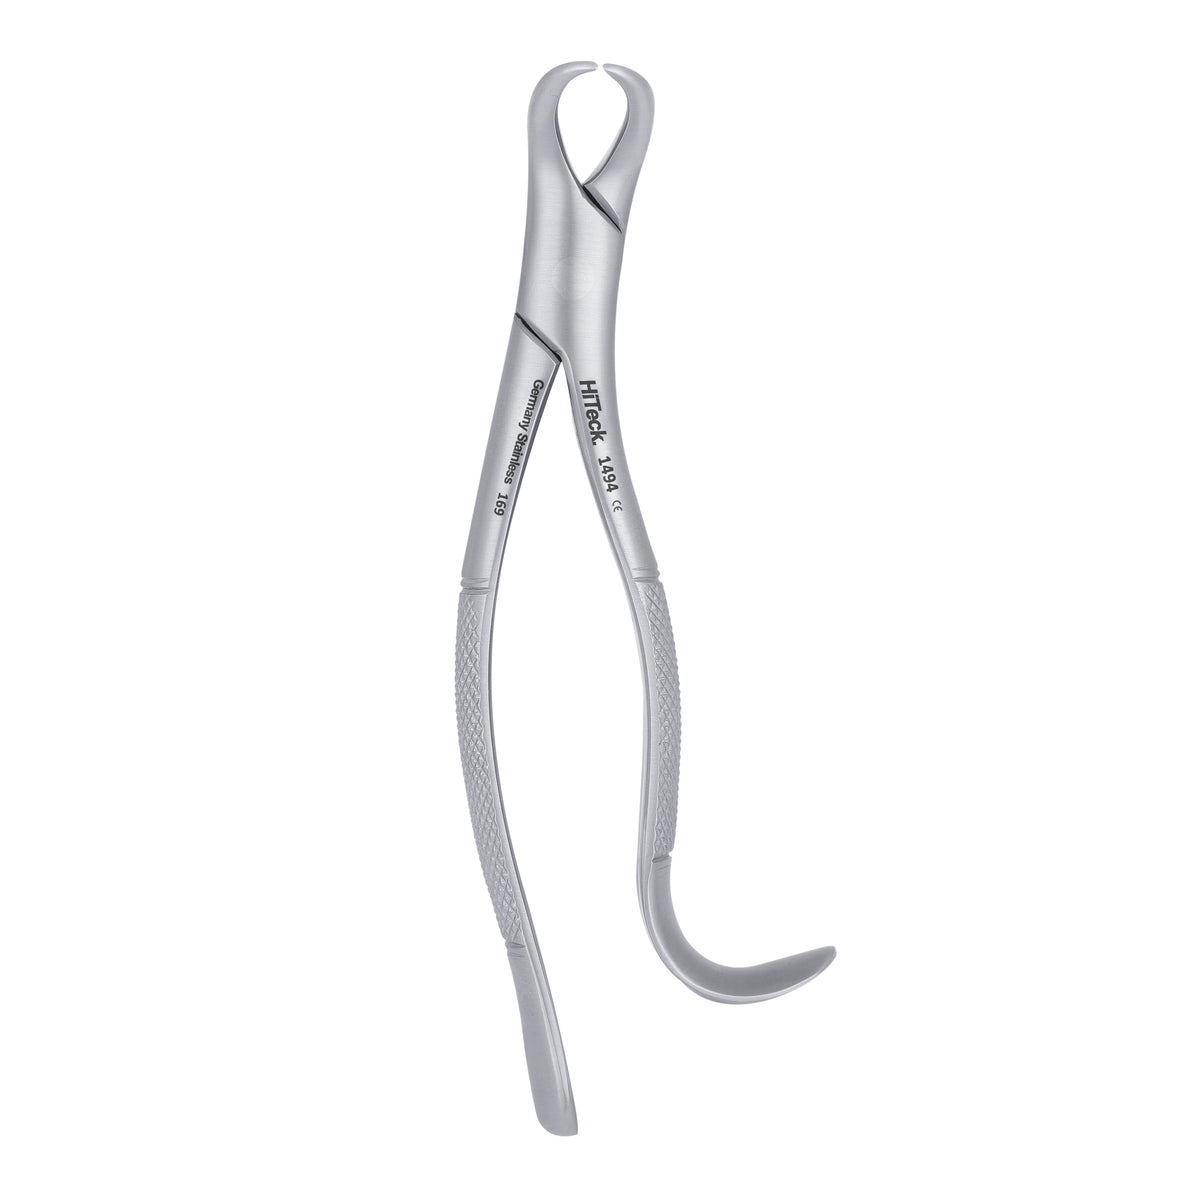 16 Cowhorn Lower Molars Extraction Forceps - HiTeck Medical Instruments